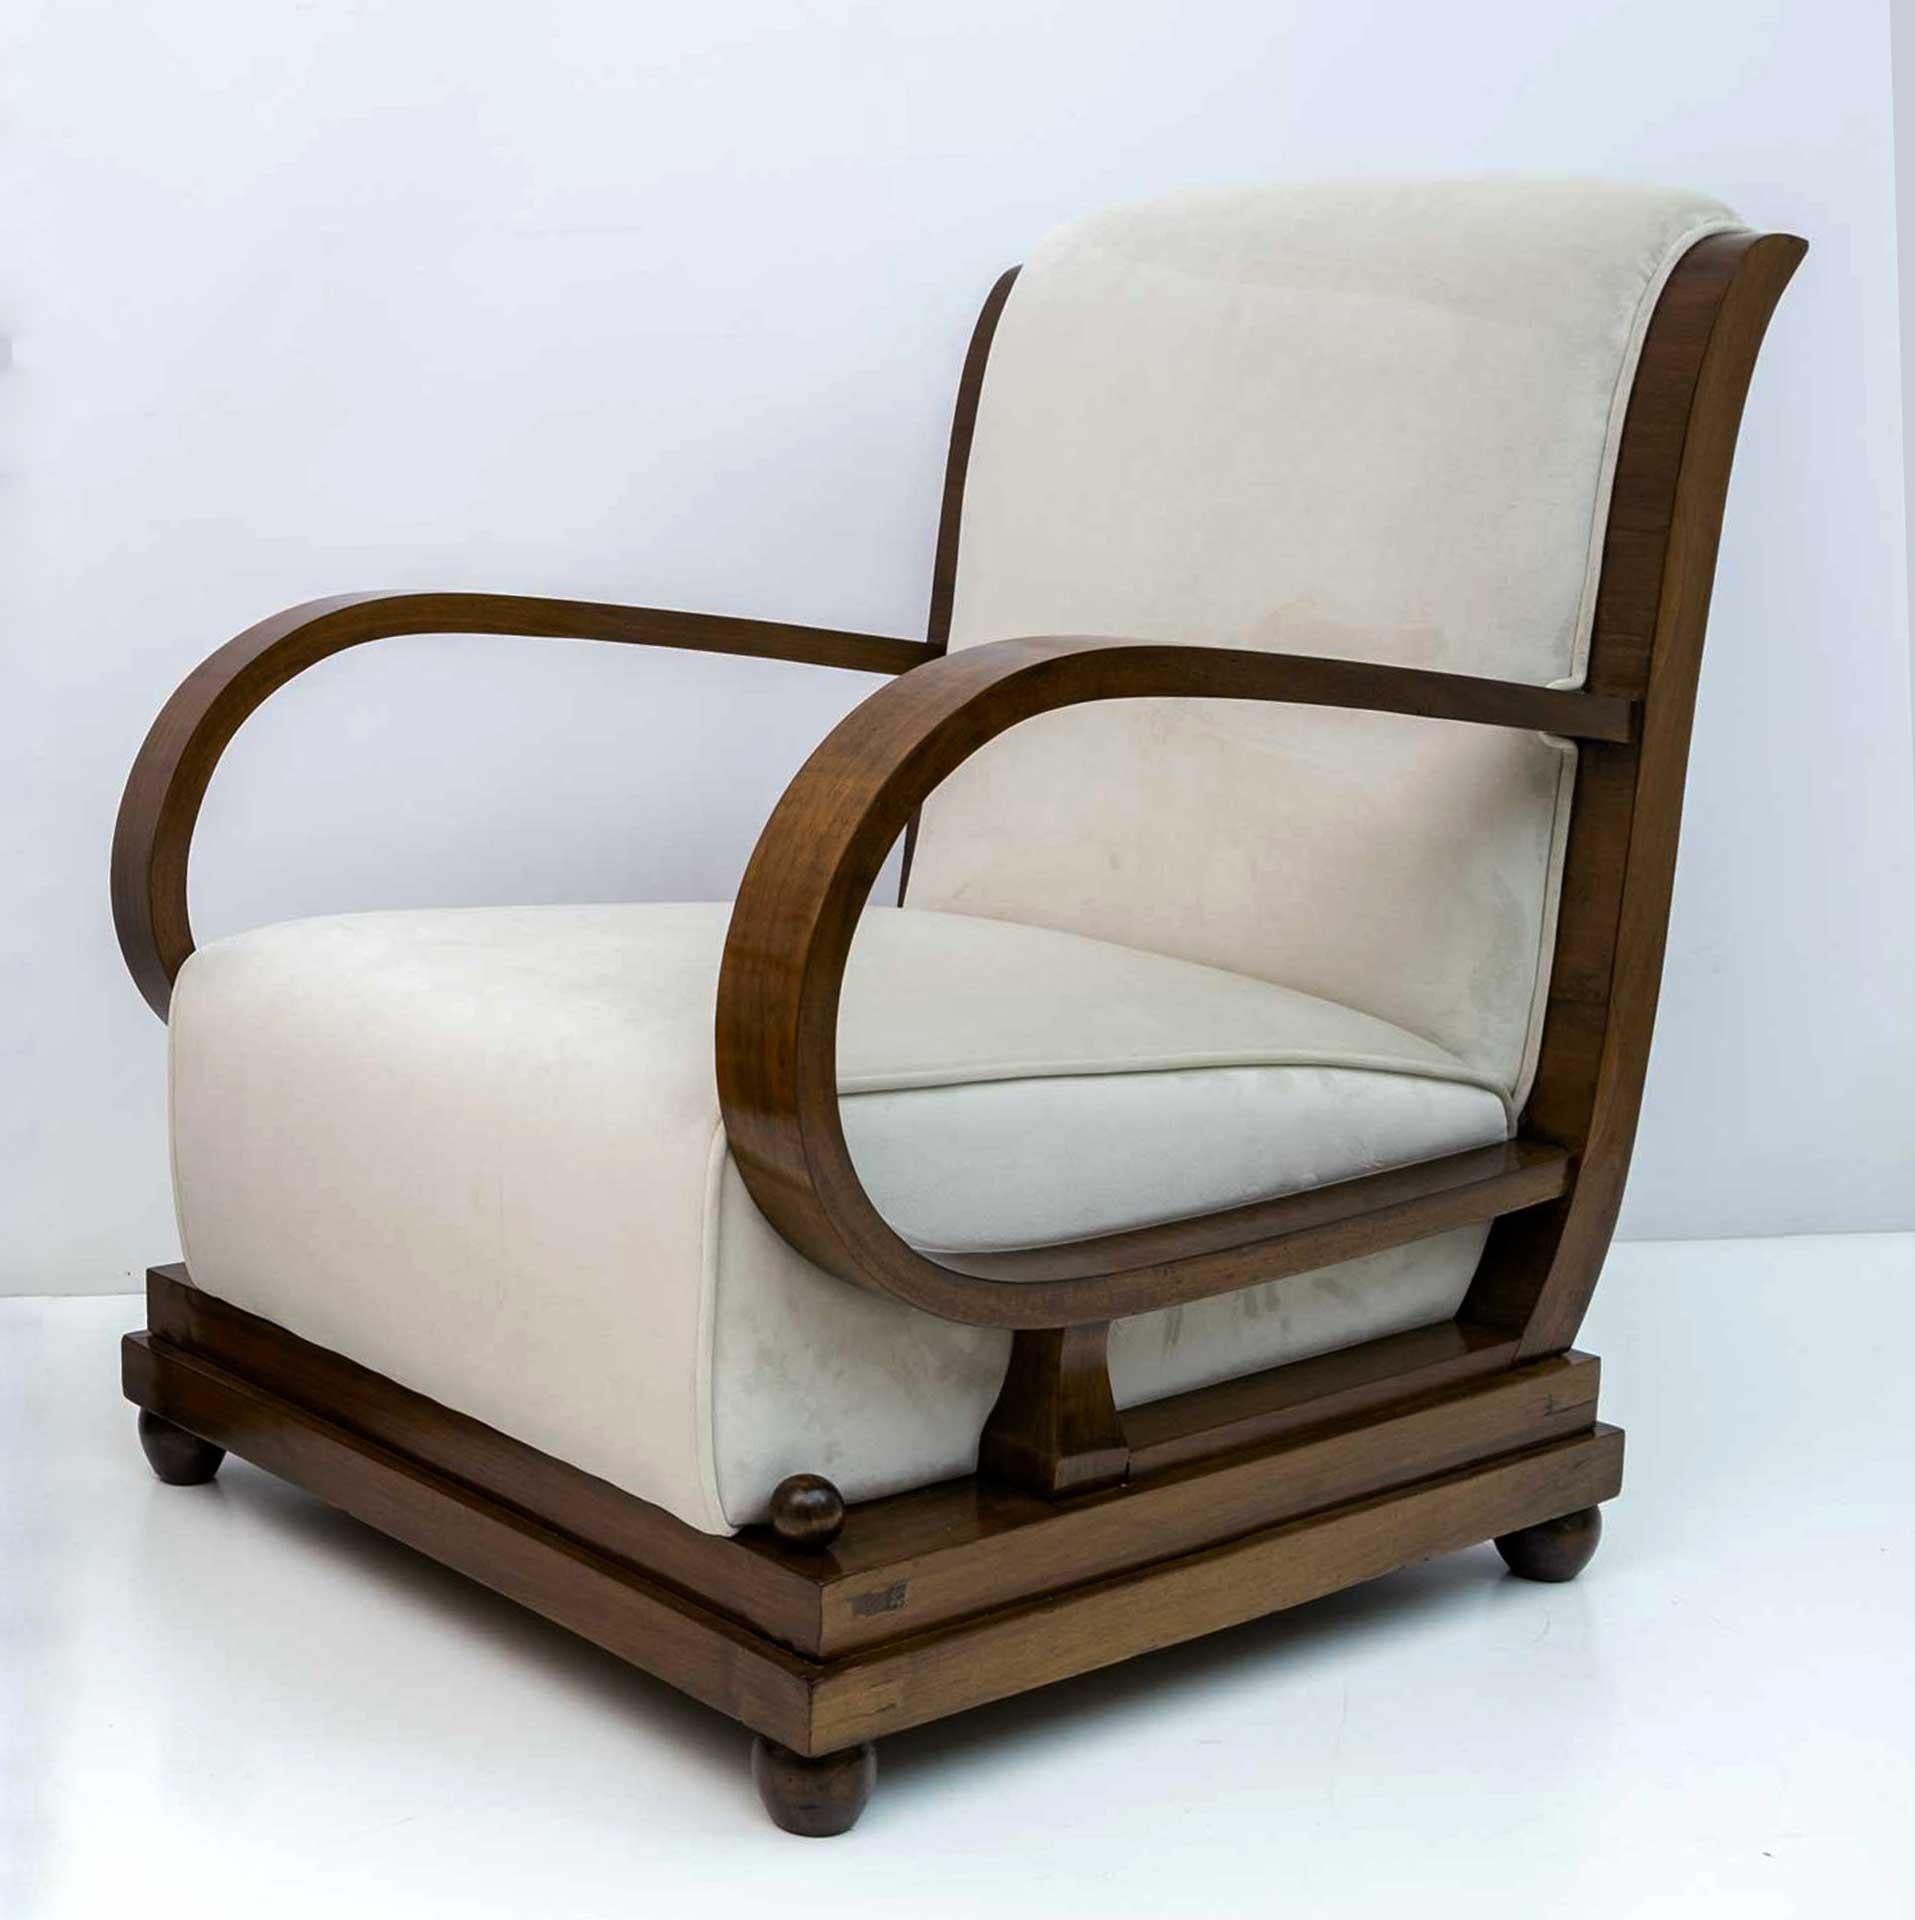 Armchair and ottoman. From the early Art Deco period of Northern Italy, in walnut and ivory velvet upholstery, the chair's back is gracefully curved and extends to accentuate the curvature of the angled armrests. Recently reupholstered and restored